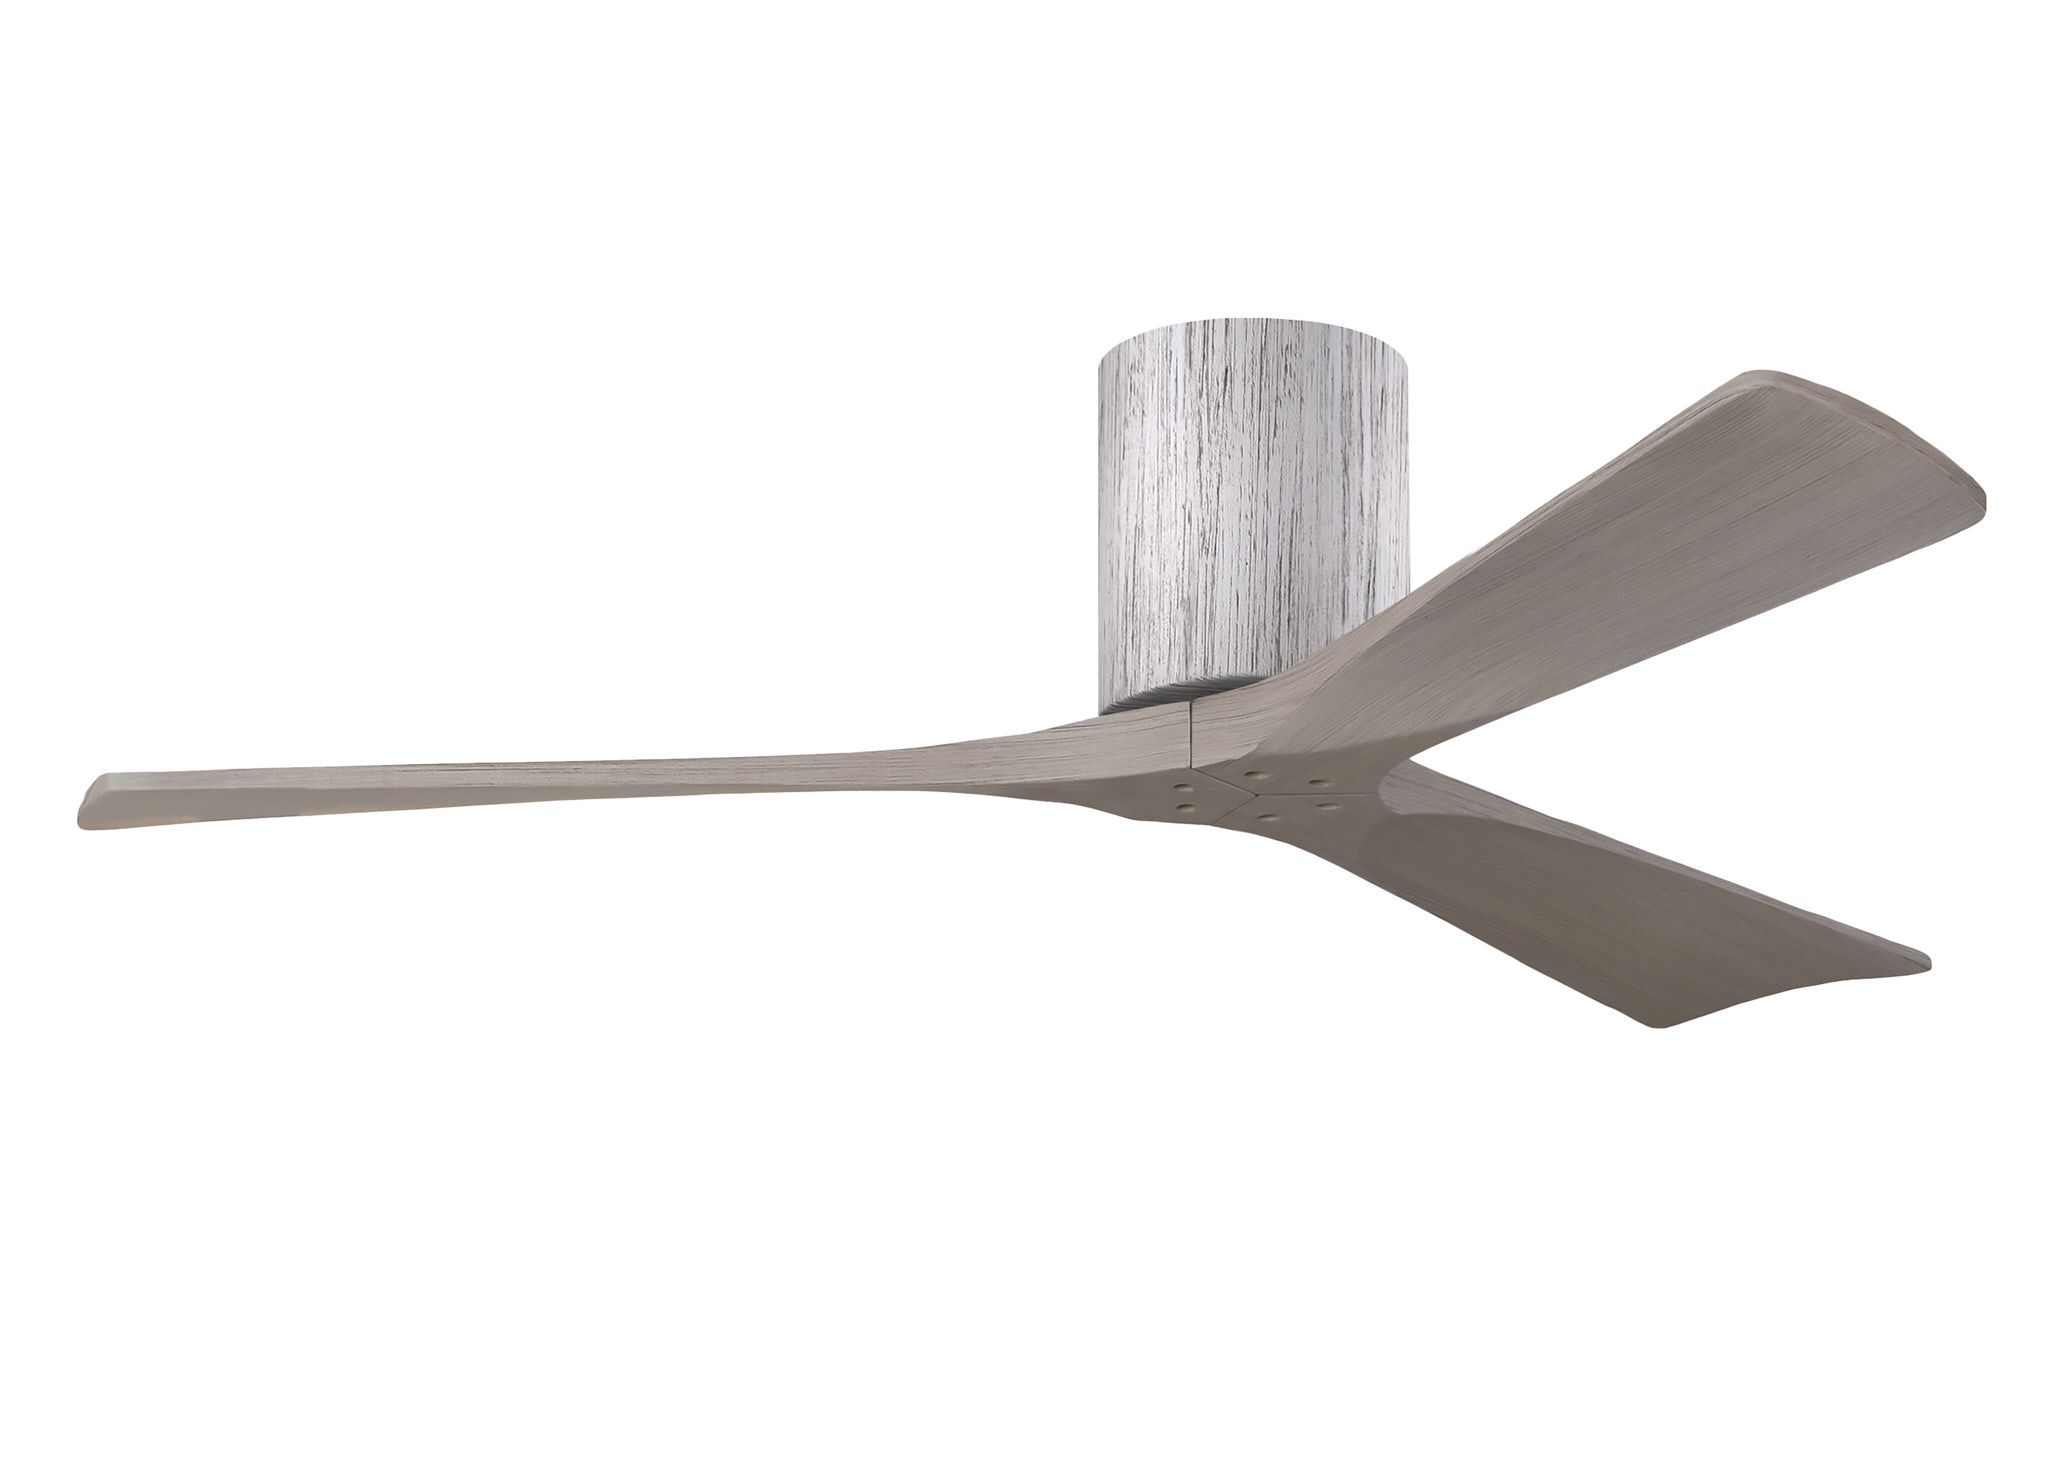 Irene-3H 6-speed ceiling fan in barn wood finish with 52